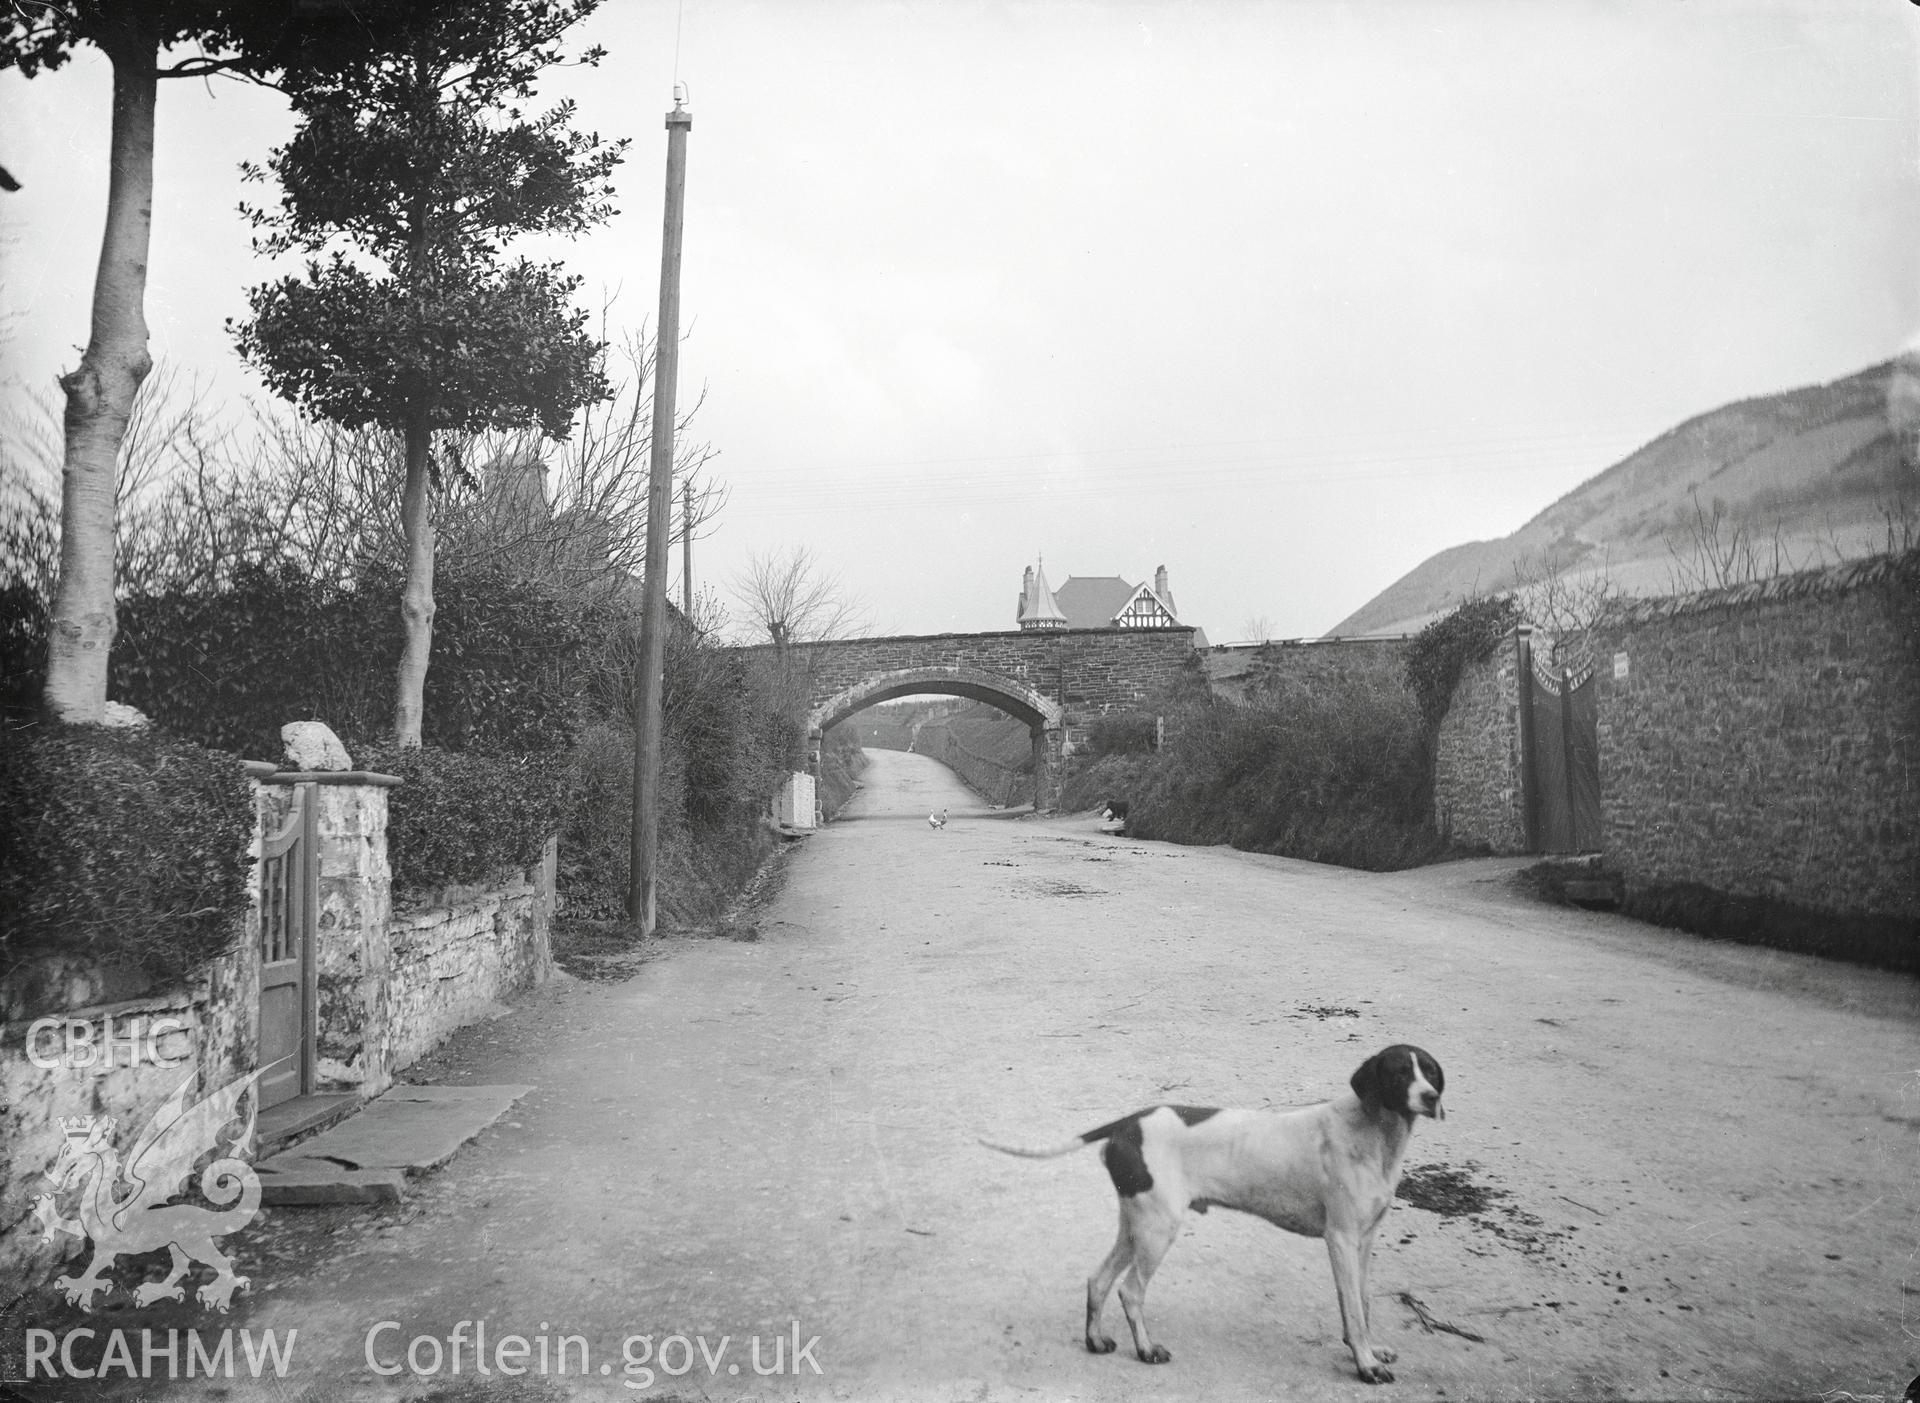 Black and white image dating from c.1910 showing the main road through Llanfarian,  taken by Emile T. Evans.